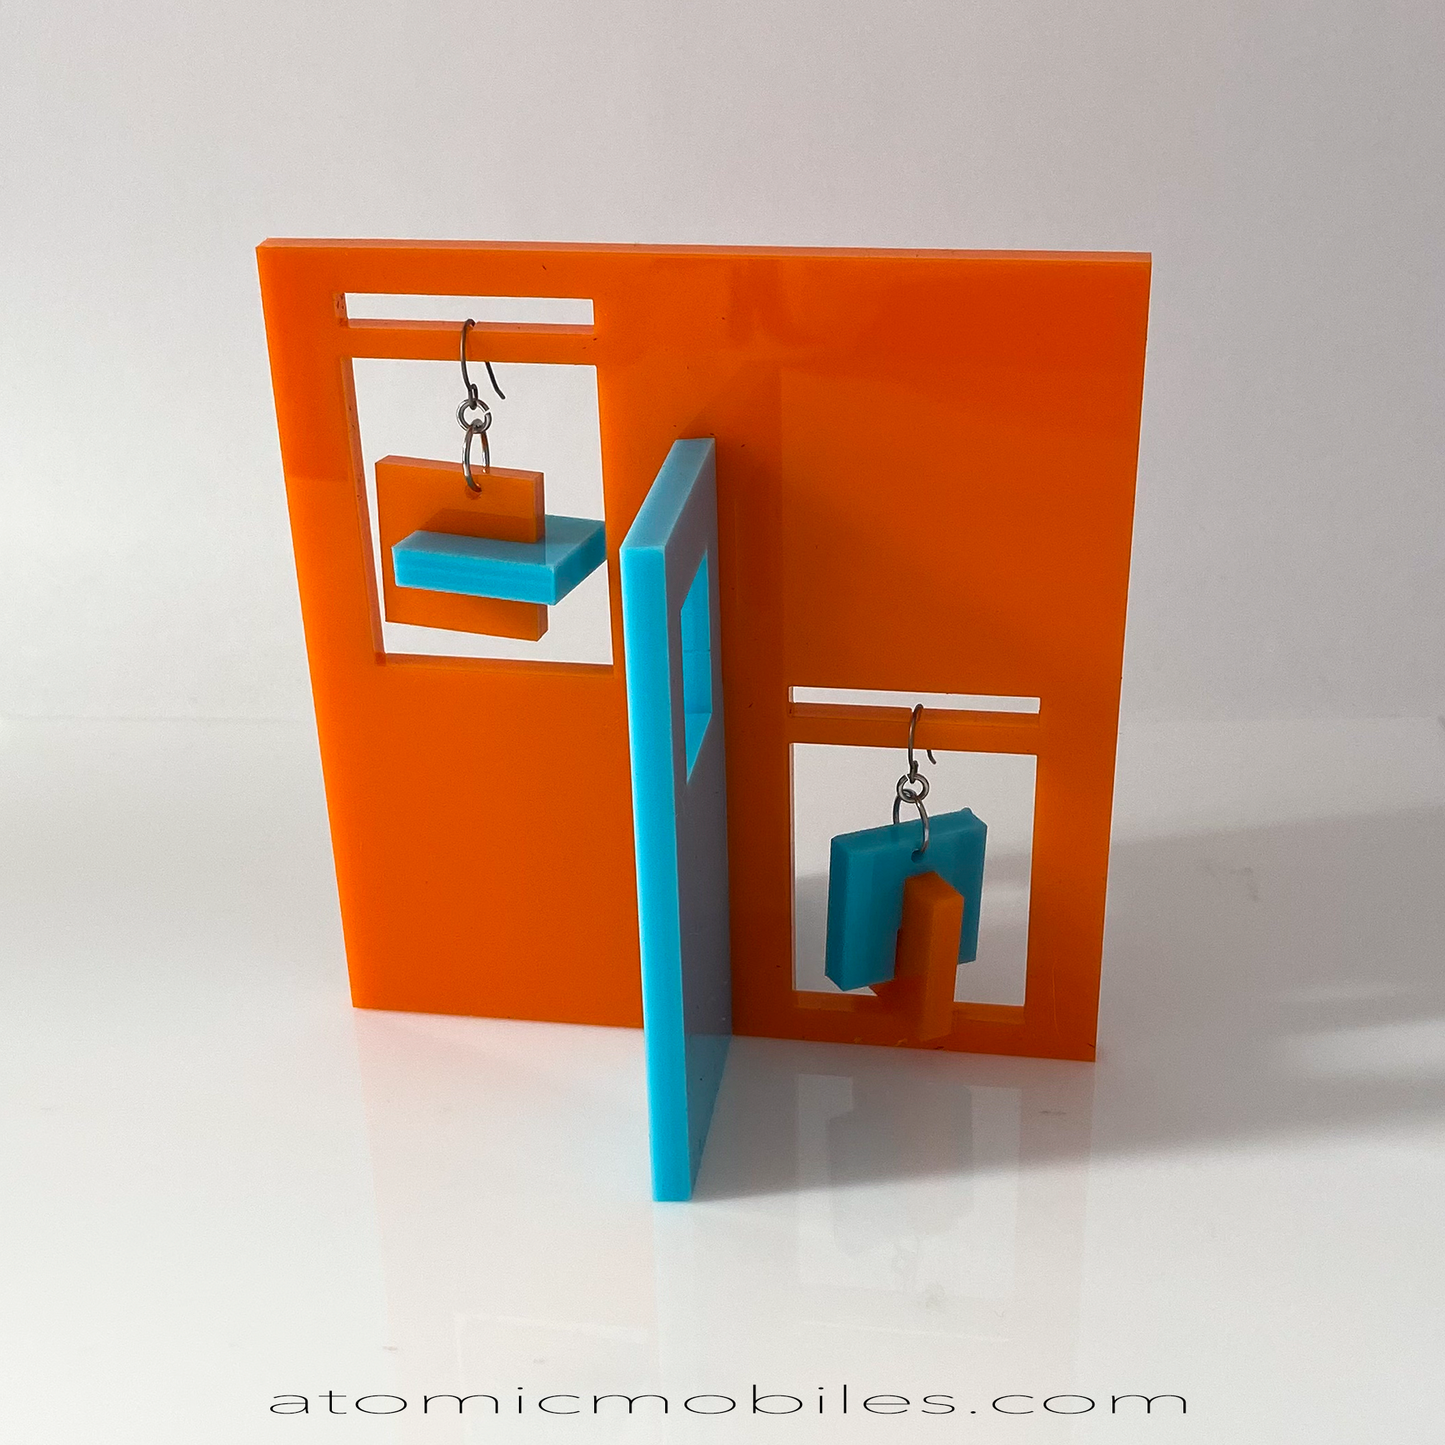 Palm Springs Mid Century Modern Inspired Moderne Earrings and Art Stabile Set in orange and aqua blue - modern art sculpture stabile by AtomicMobiles.com